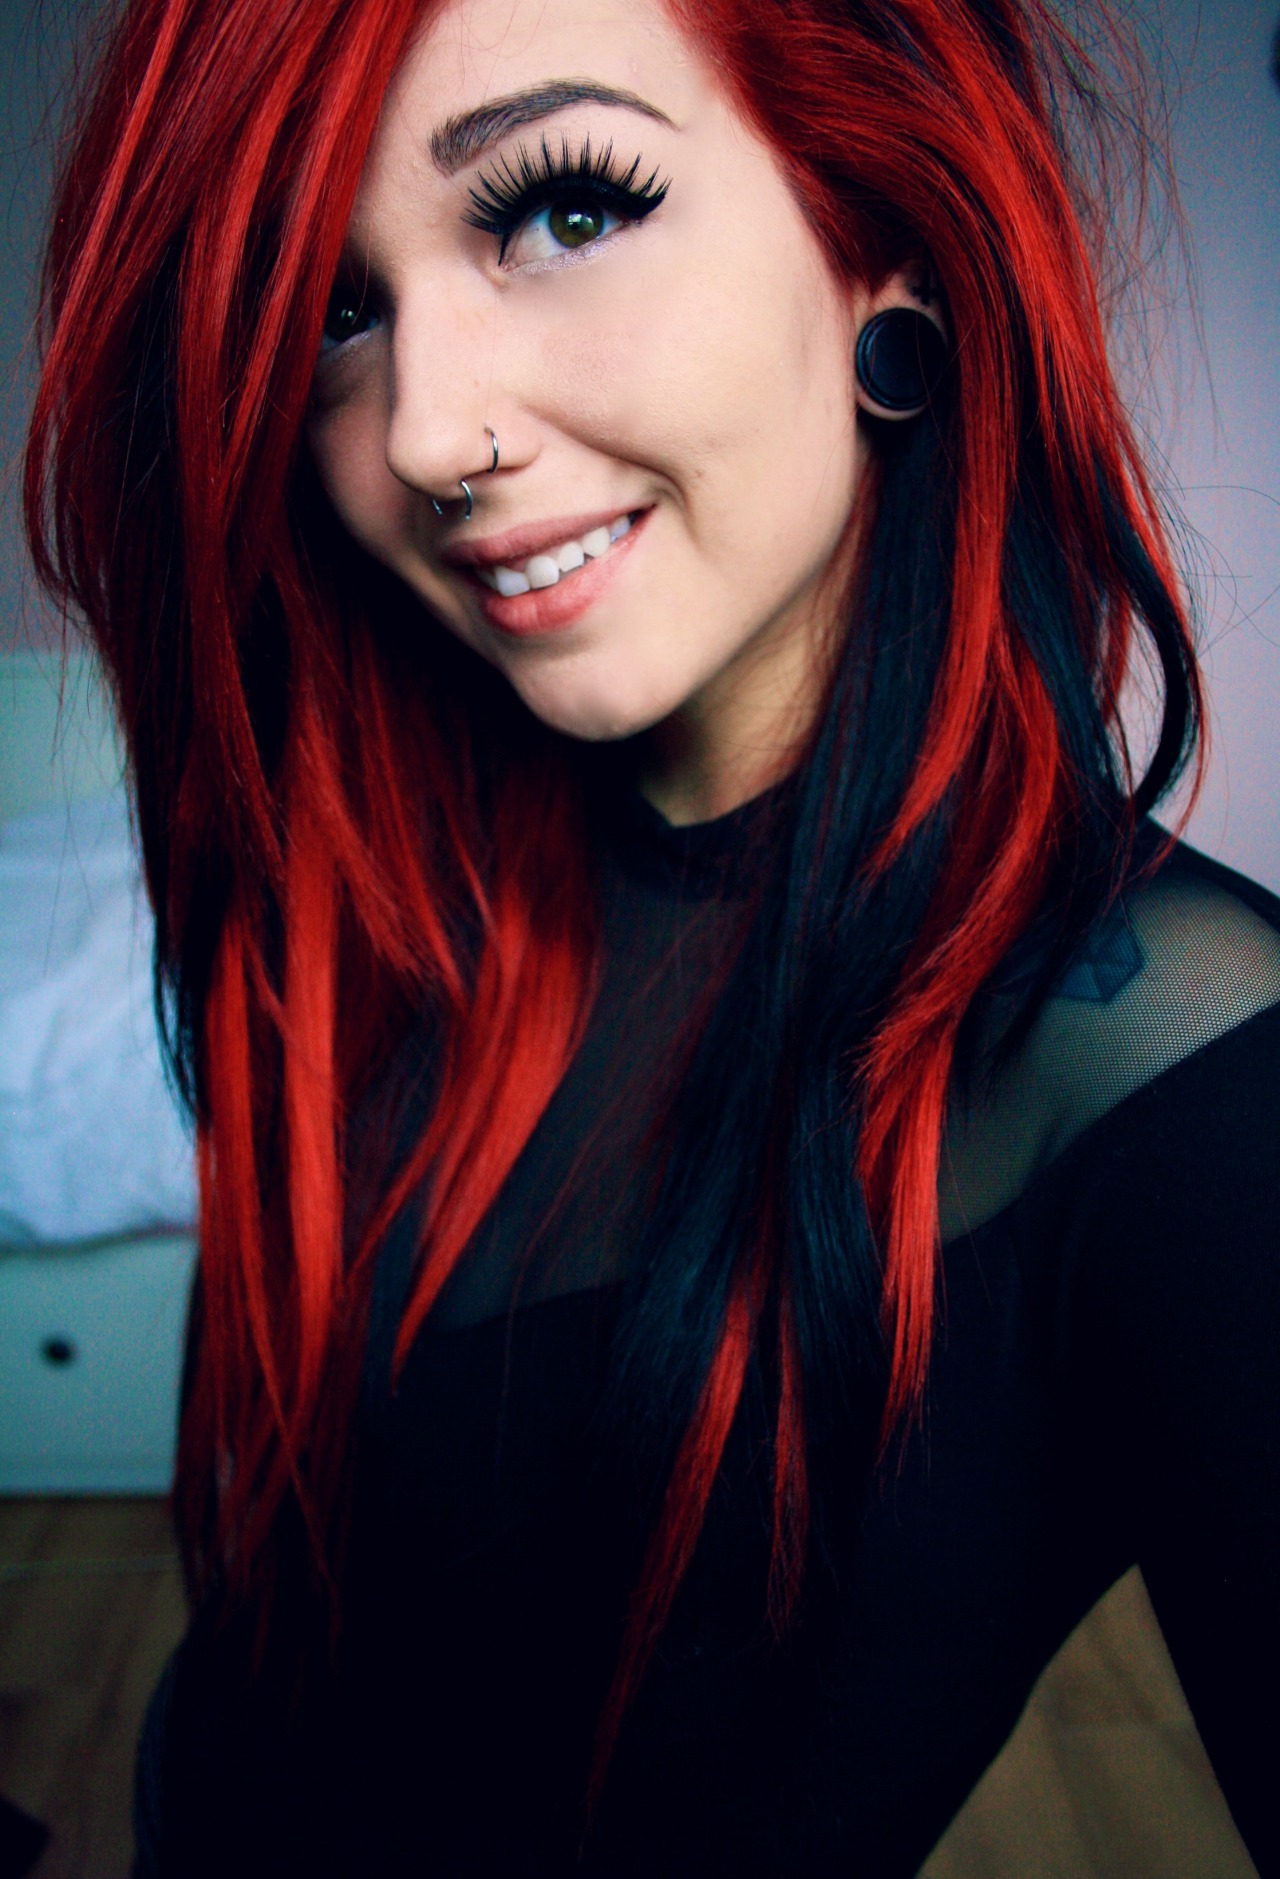 Black emo girl with red hair